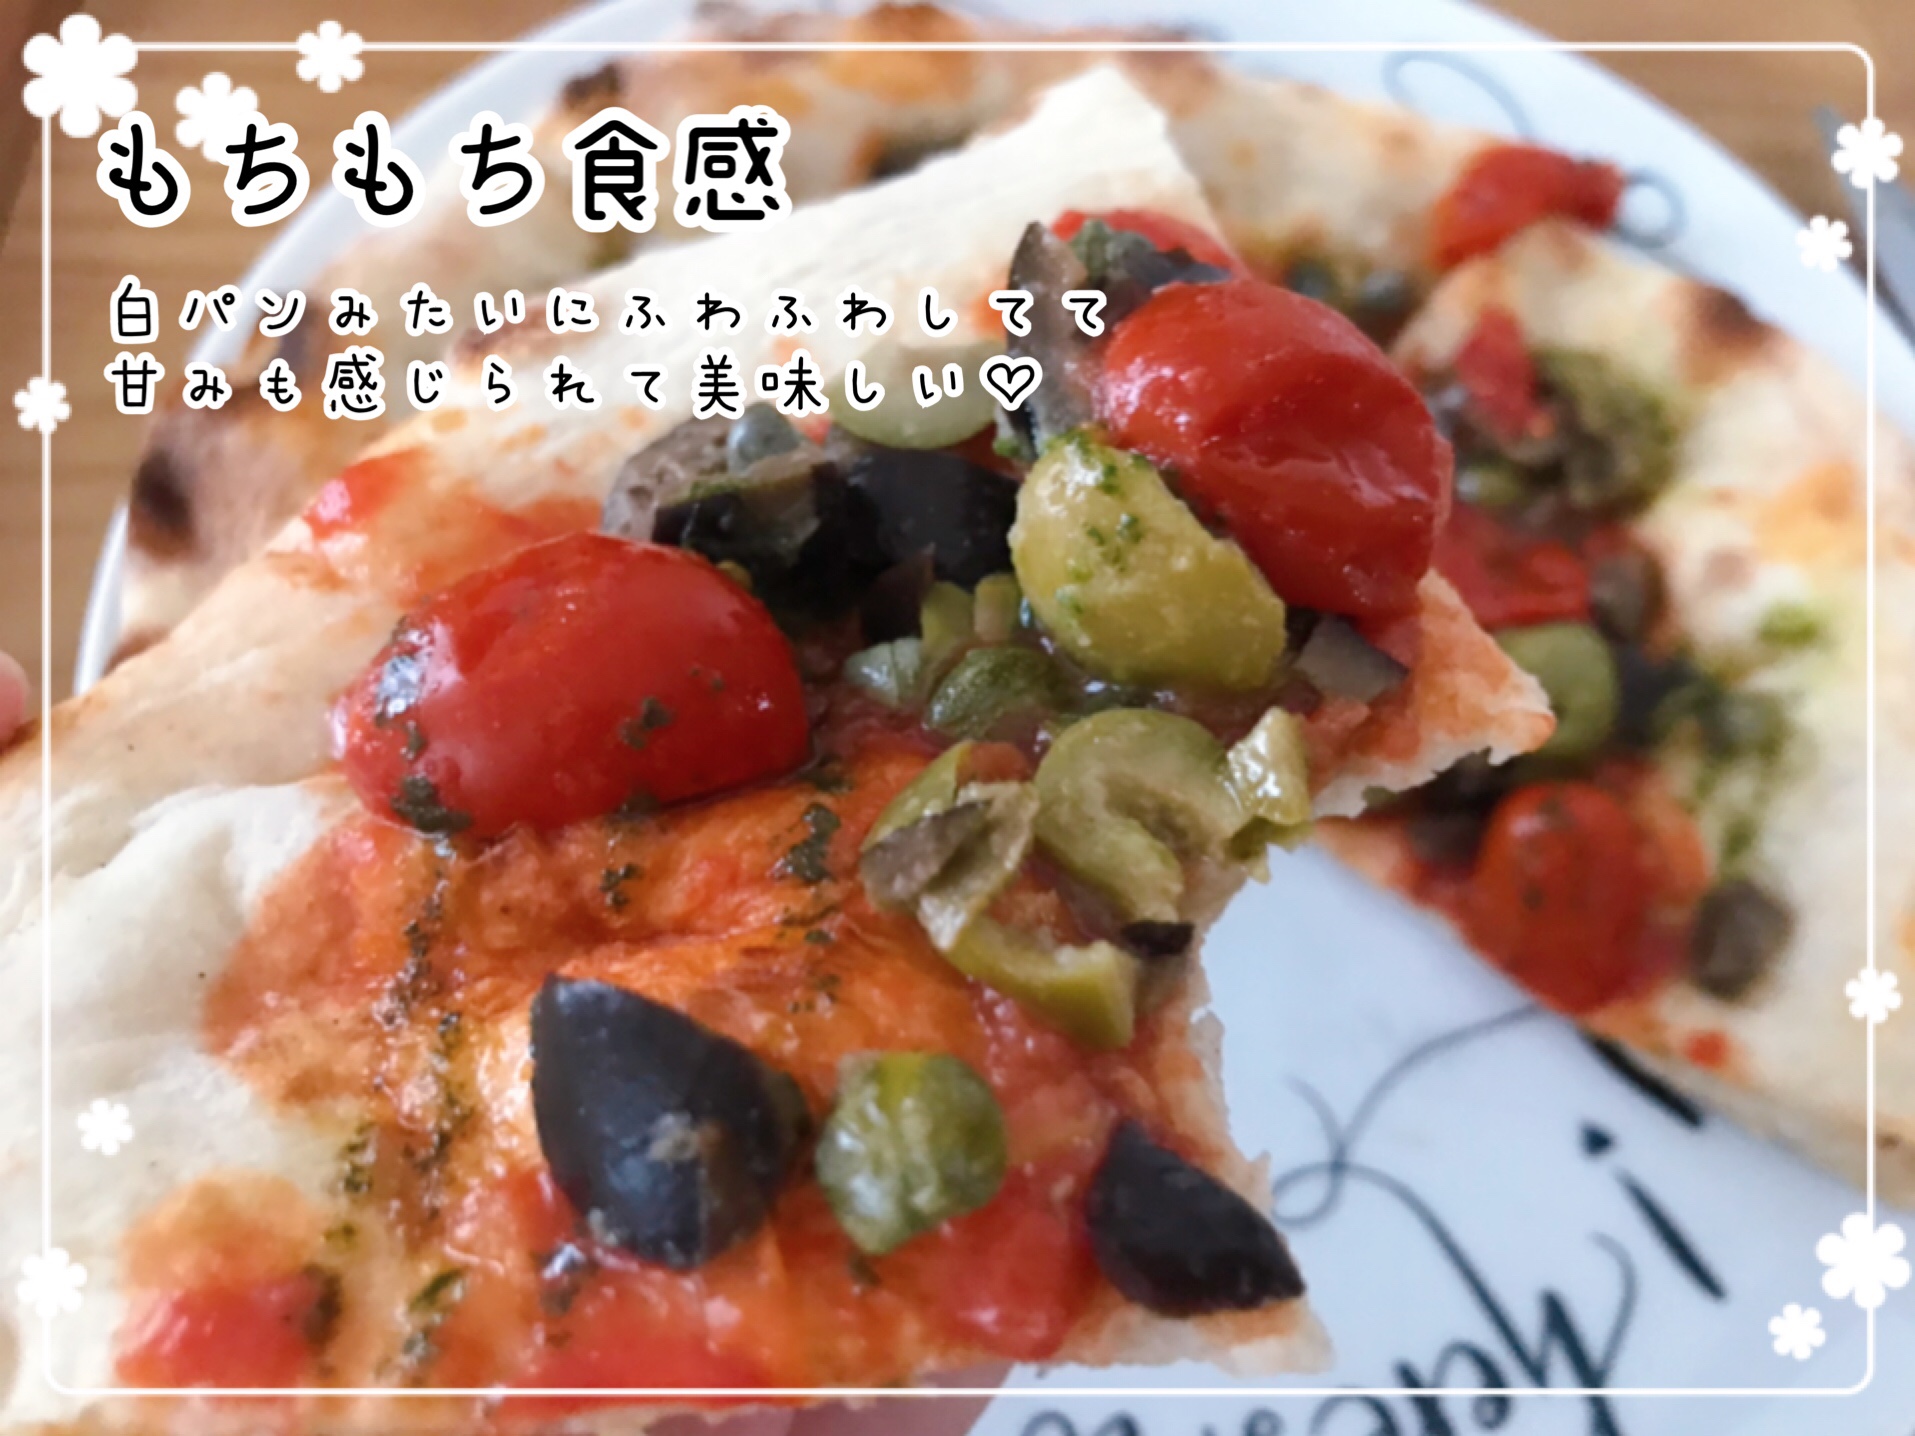 PIZZALABOの冷凍ピザ